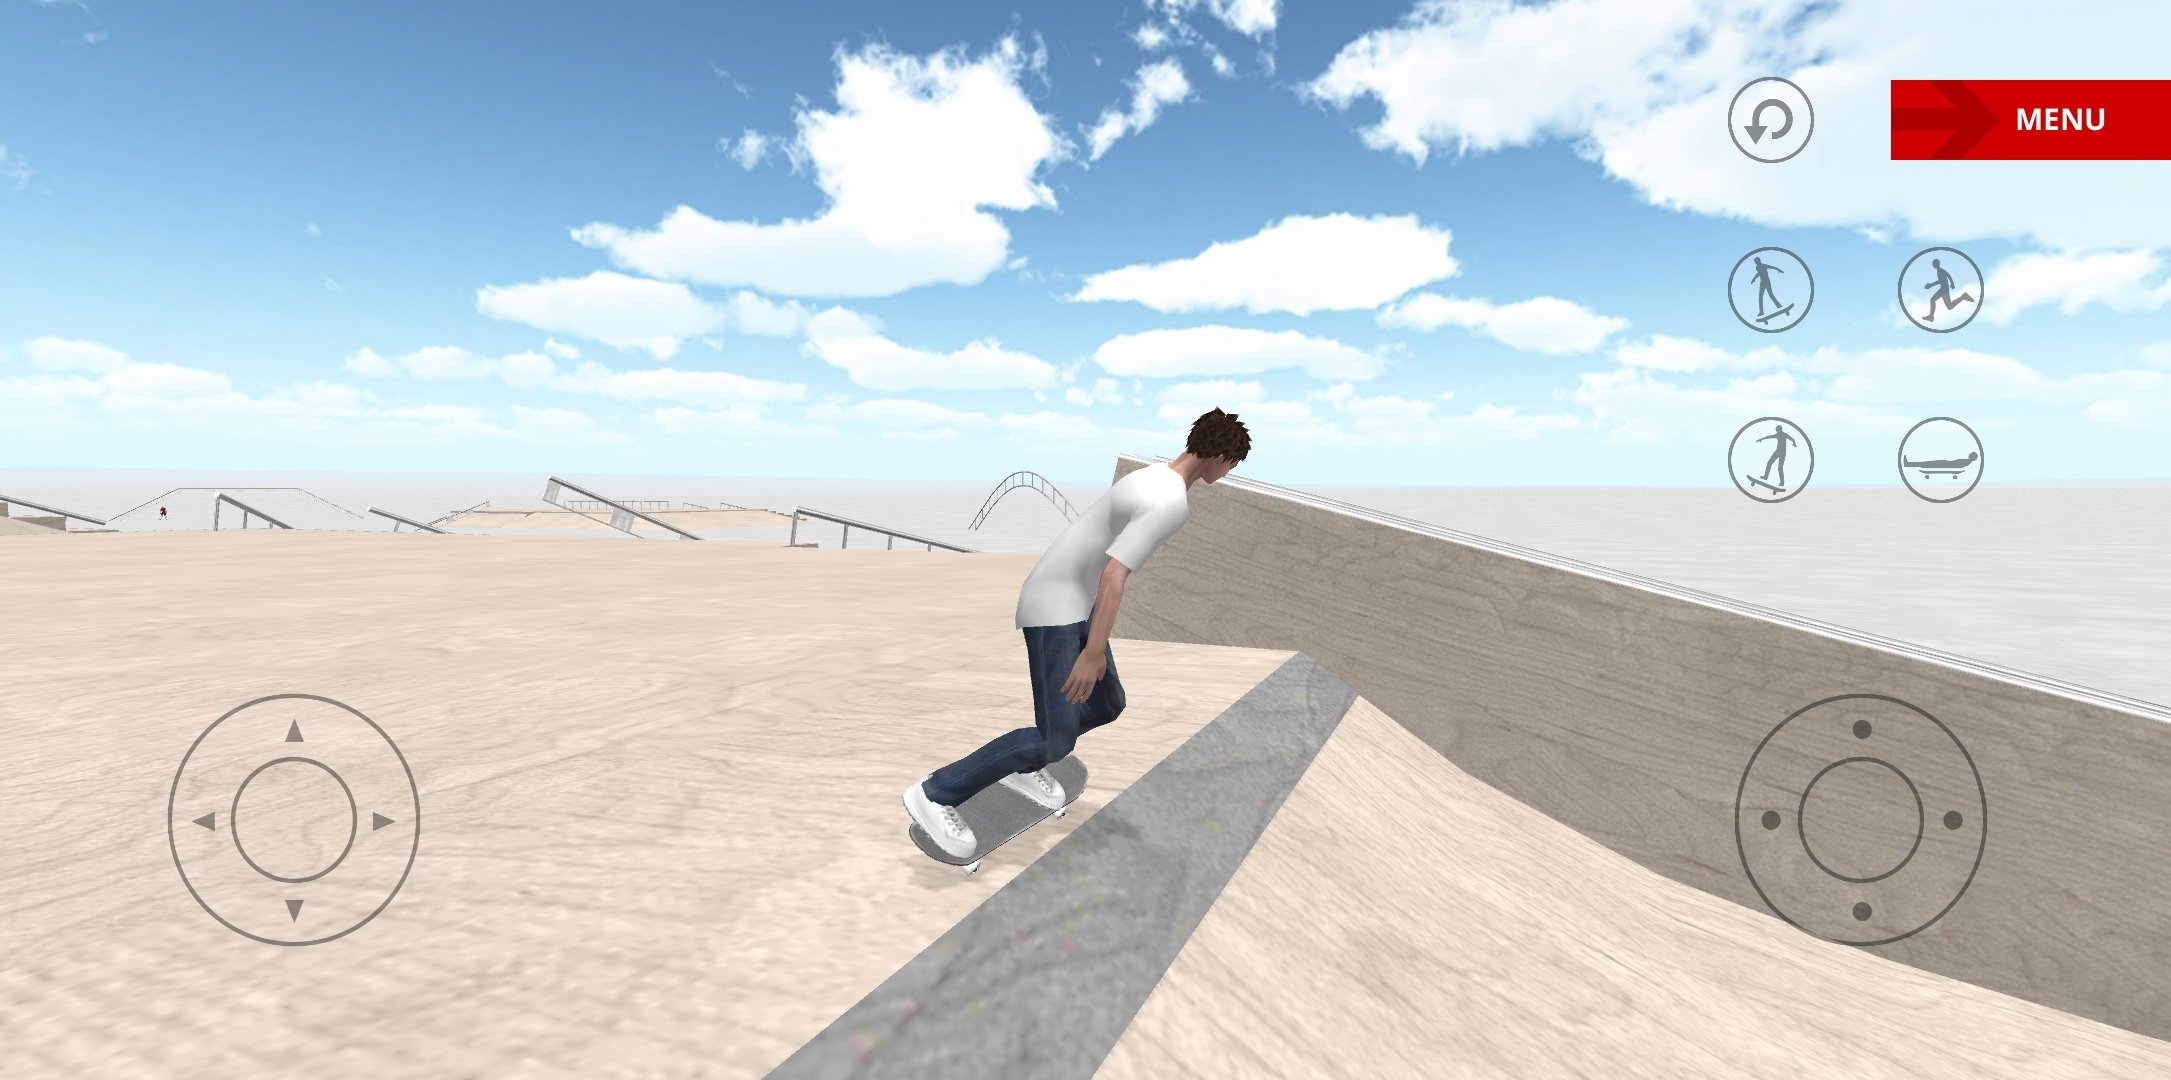 Download and play Skate Space on PC with MuMu Player